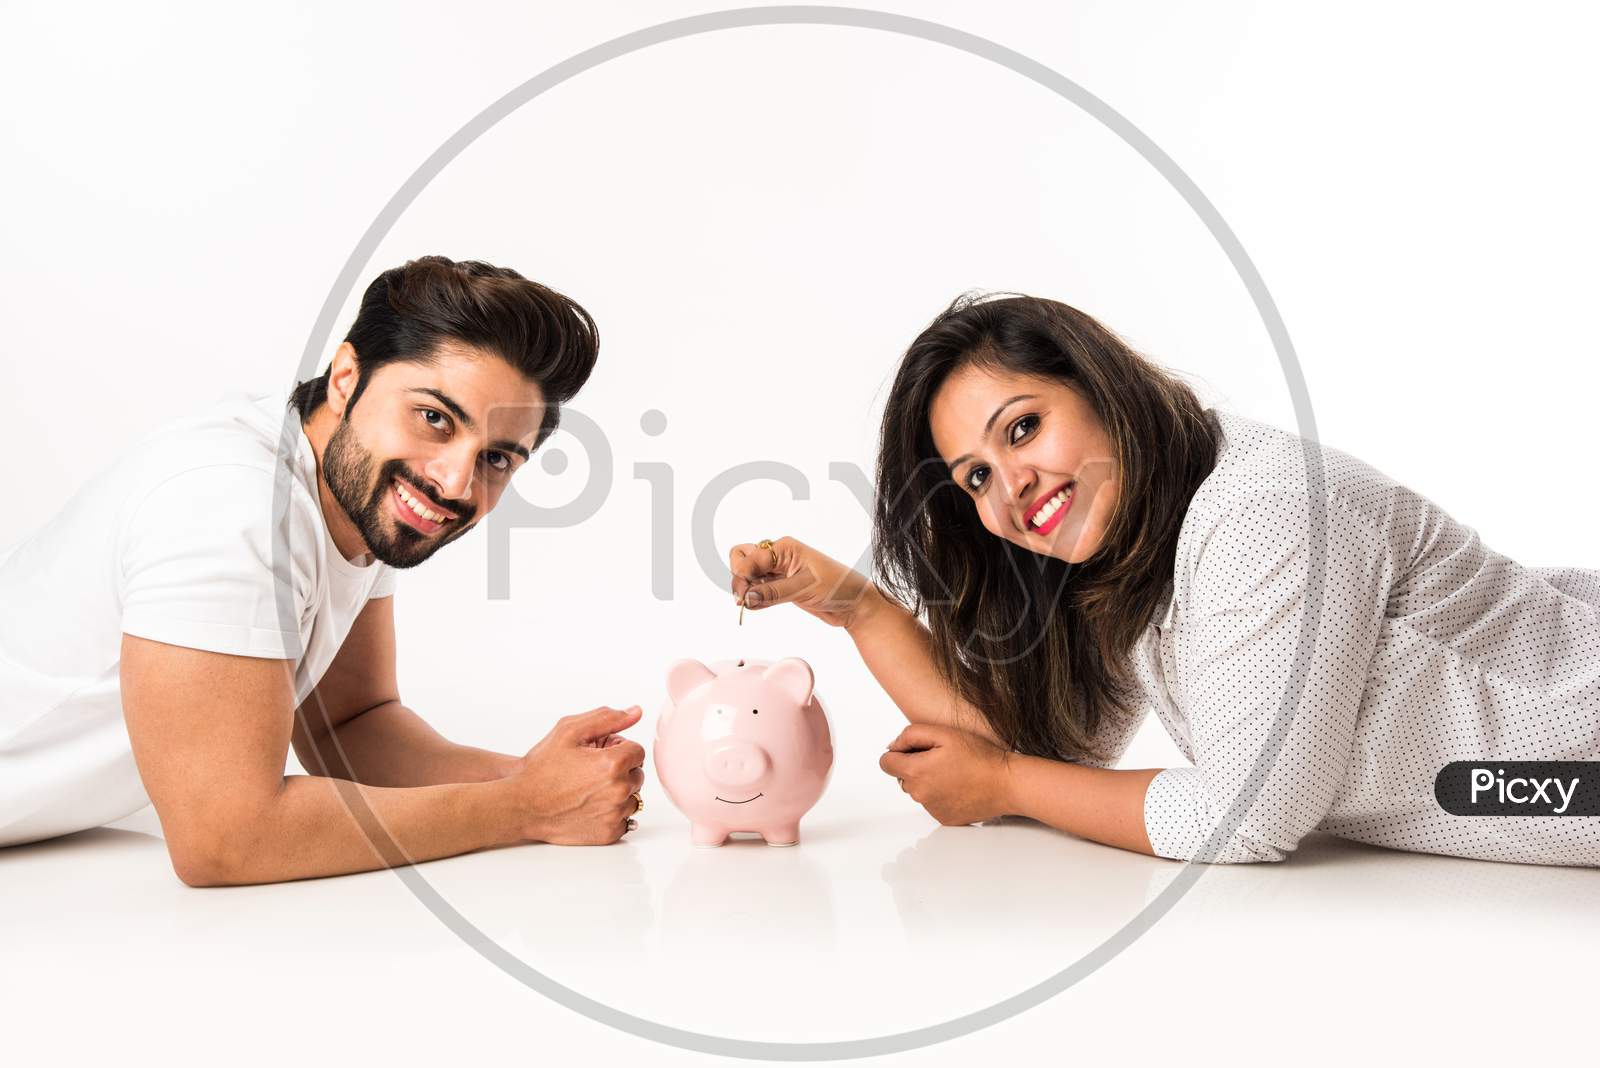 Indian couple with piggy bank, isolated over white background